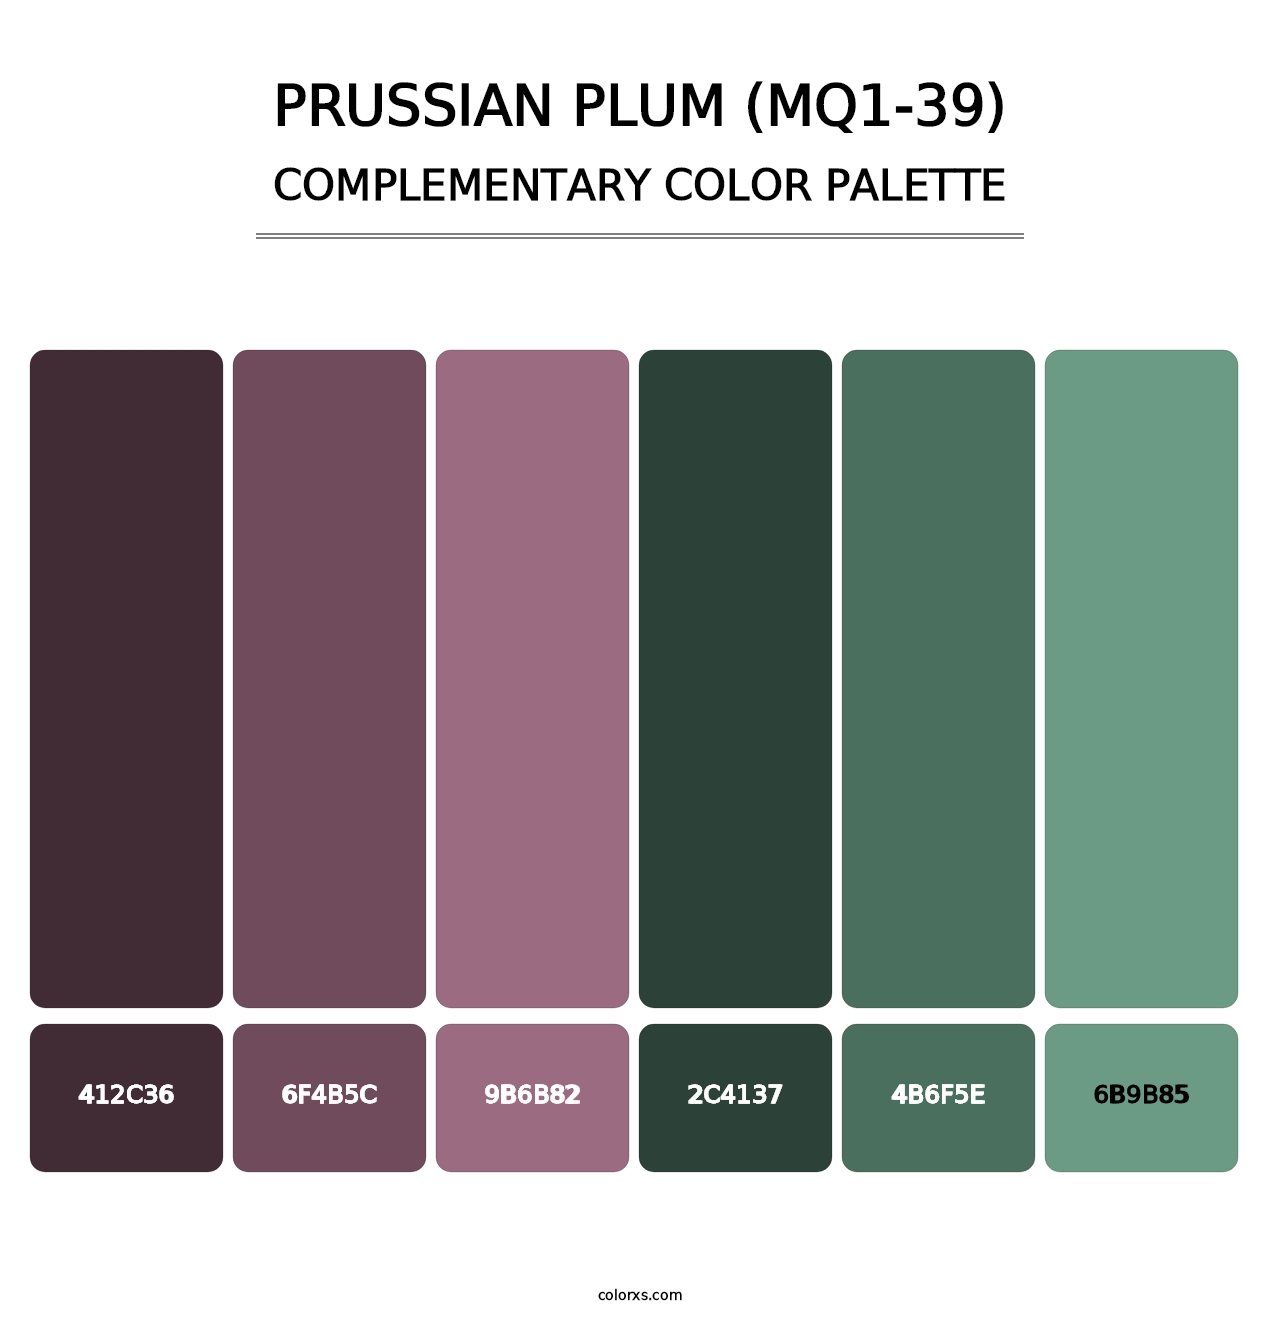 Prussian Plum (MQ1-39) - Complementary Color Palette